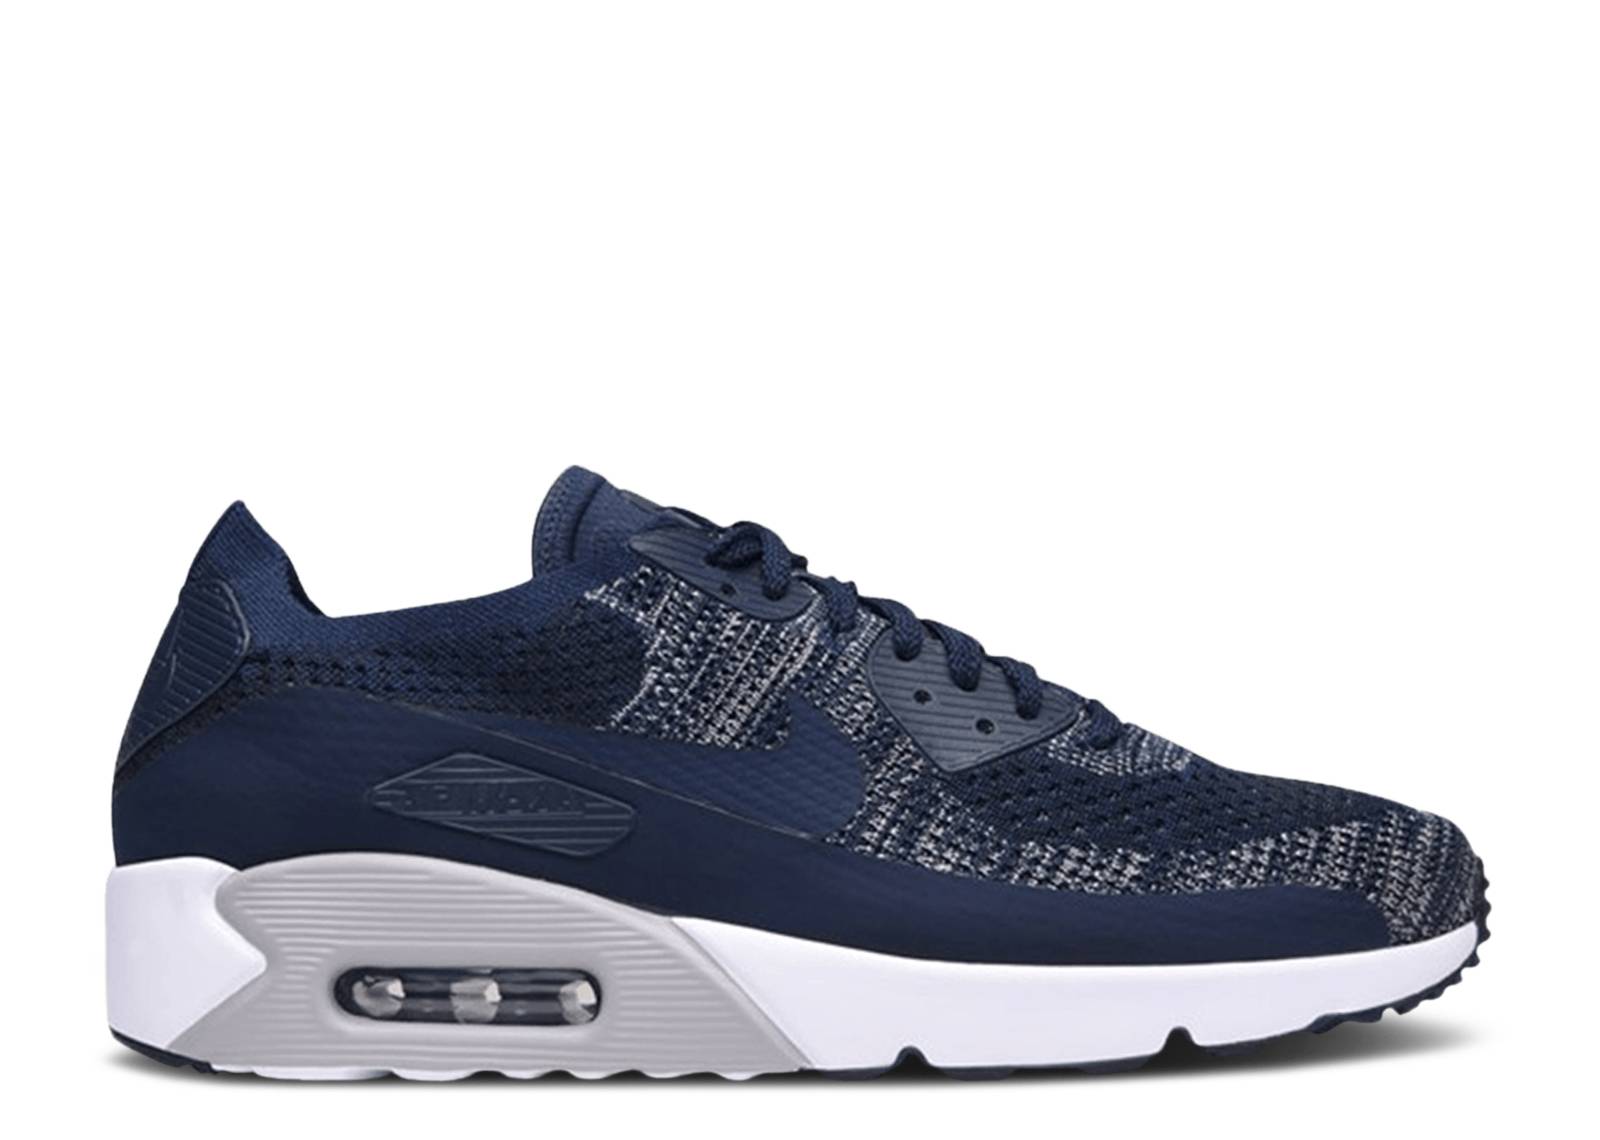 Air Max 90 Ultra 2.0 Flyknit 'College Navy'